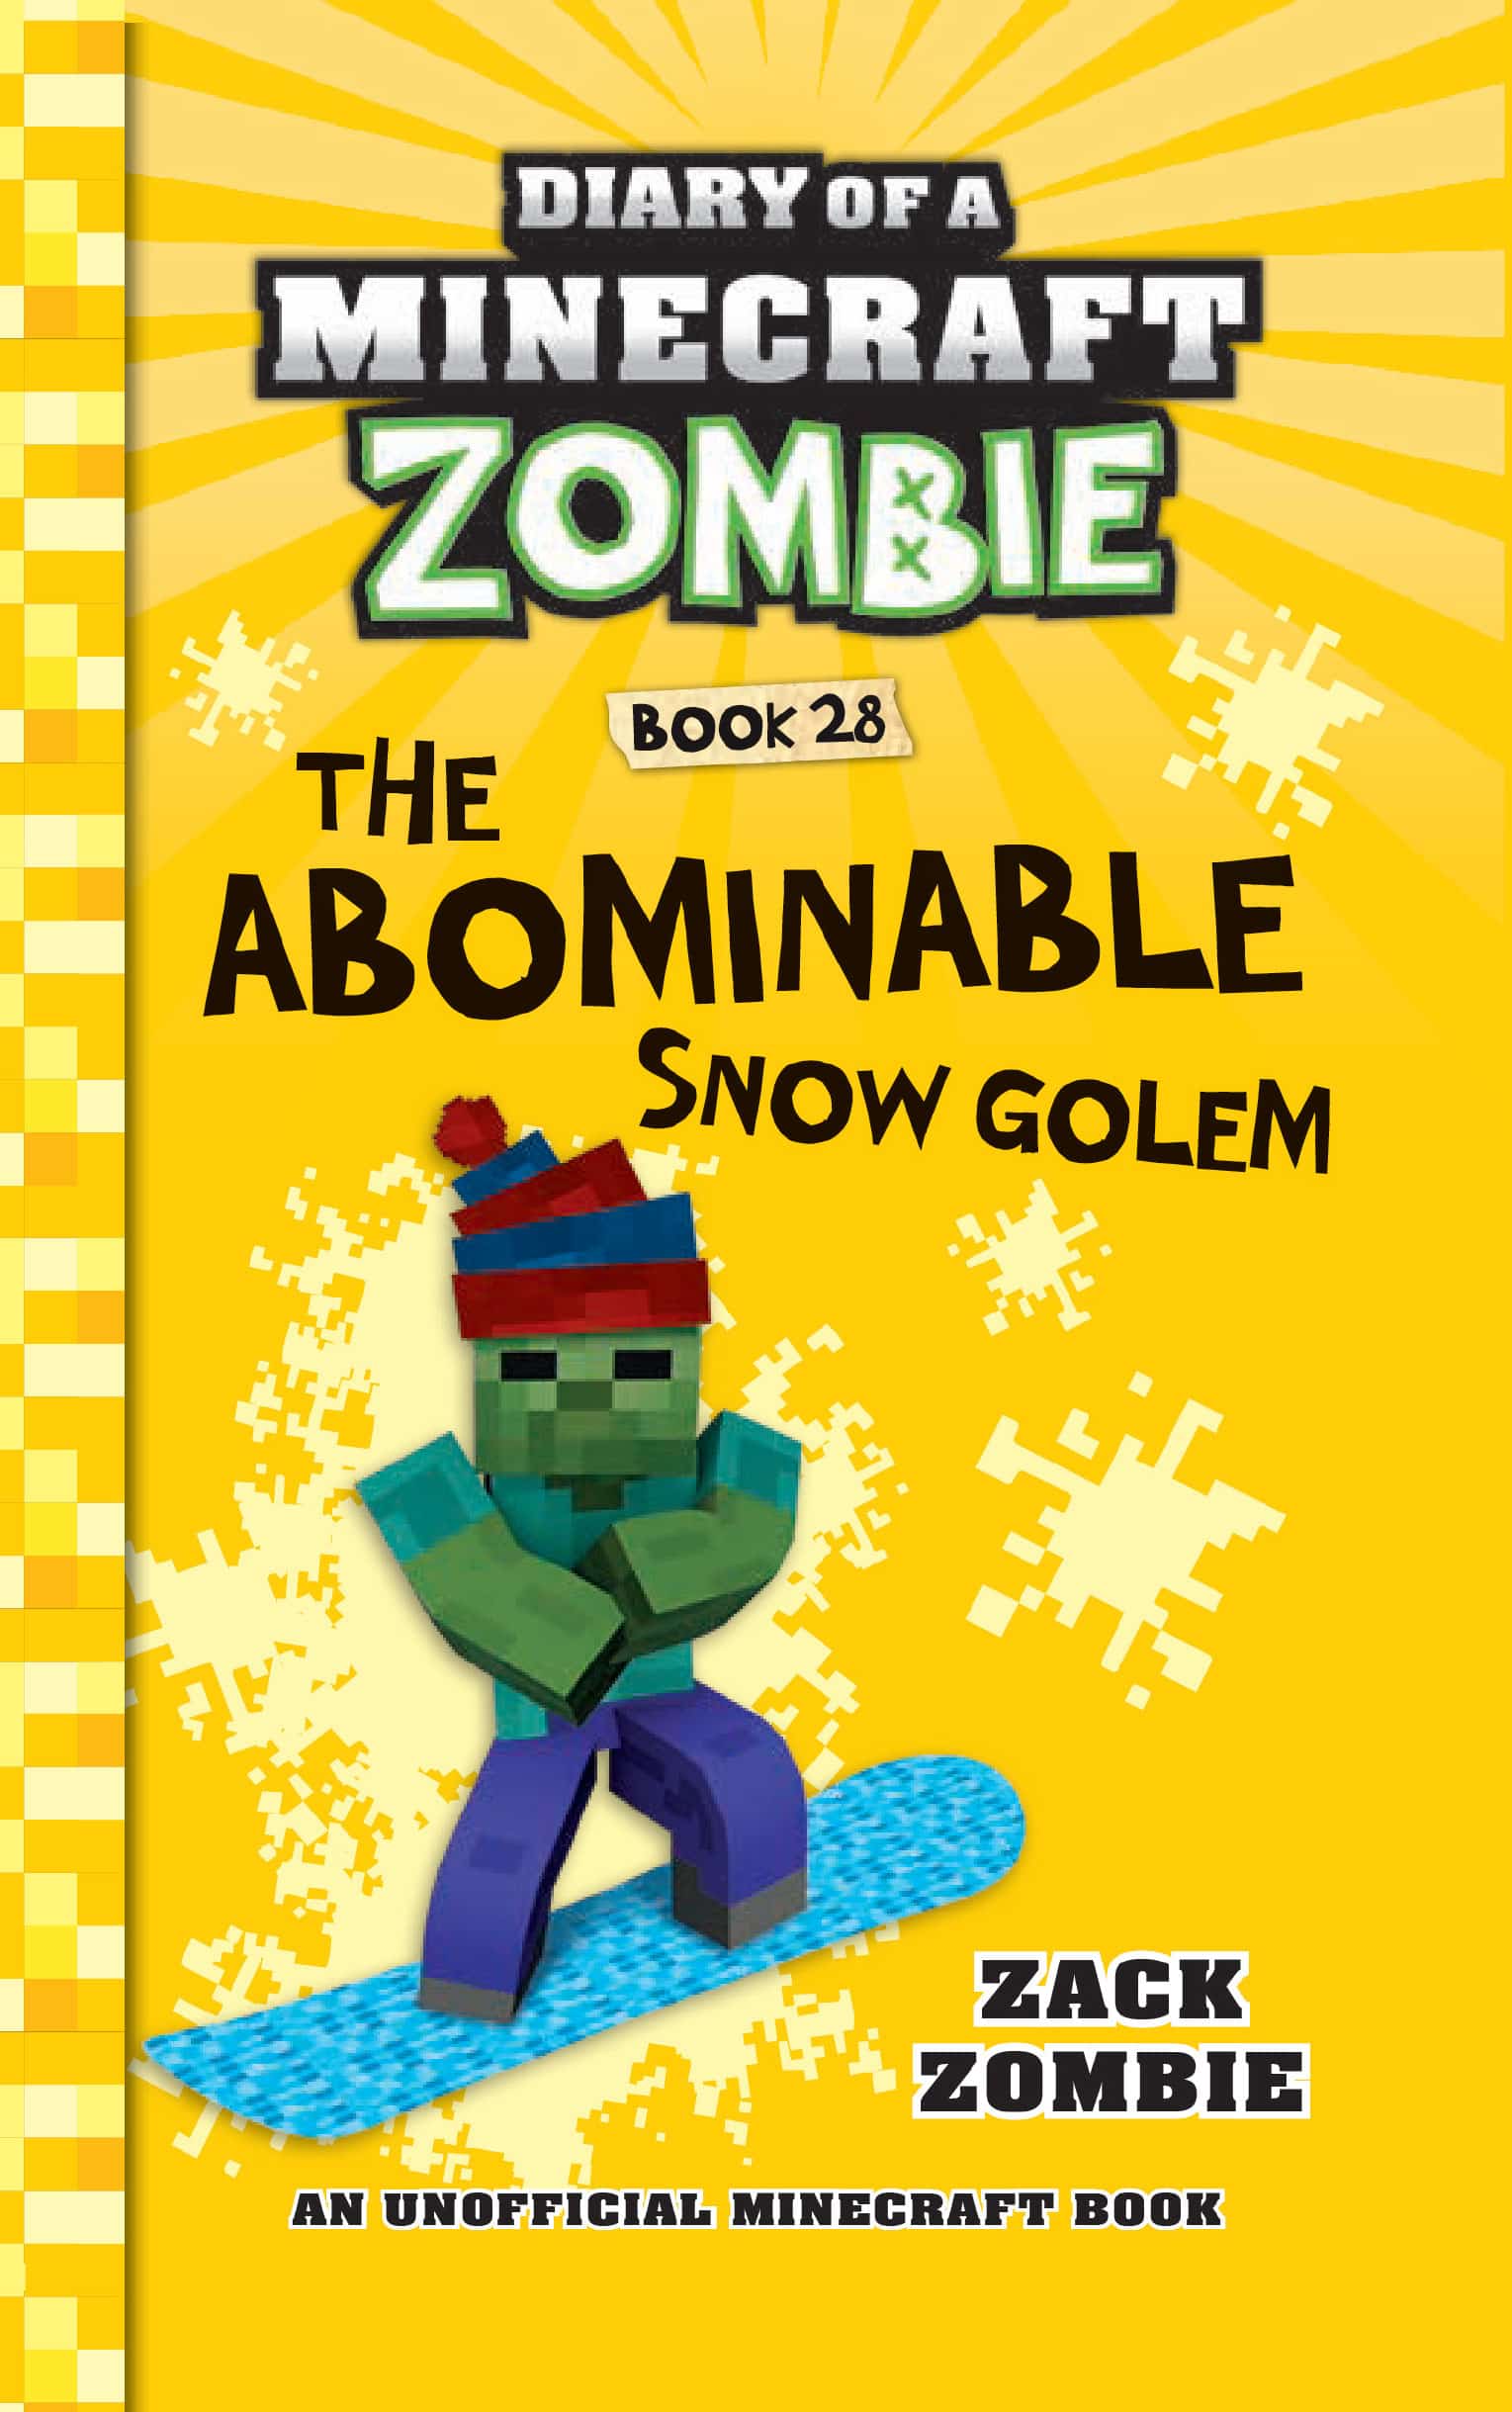 book 28 diary of a Minecraft zombie 